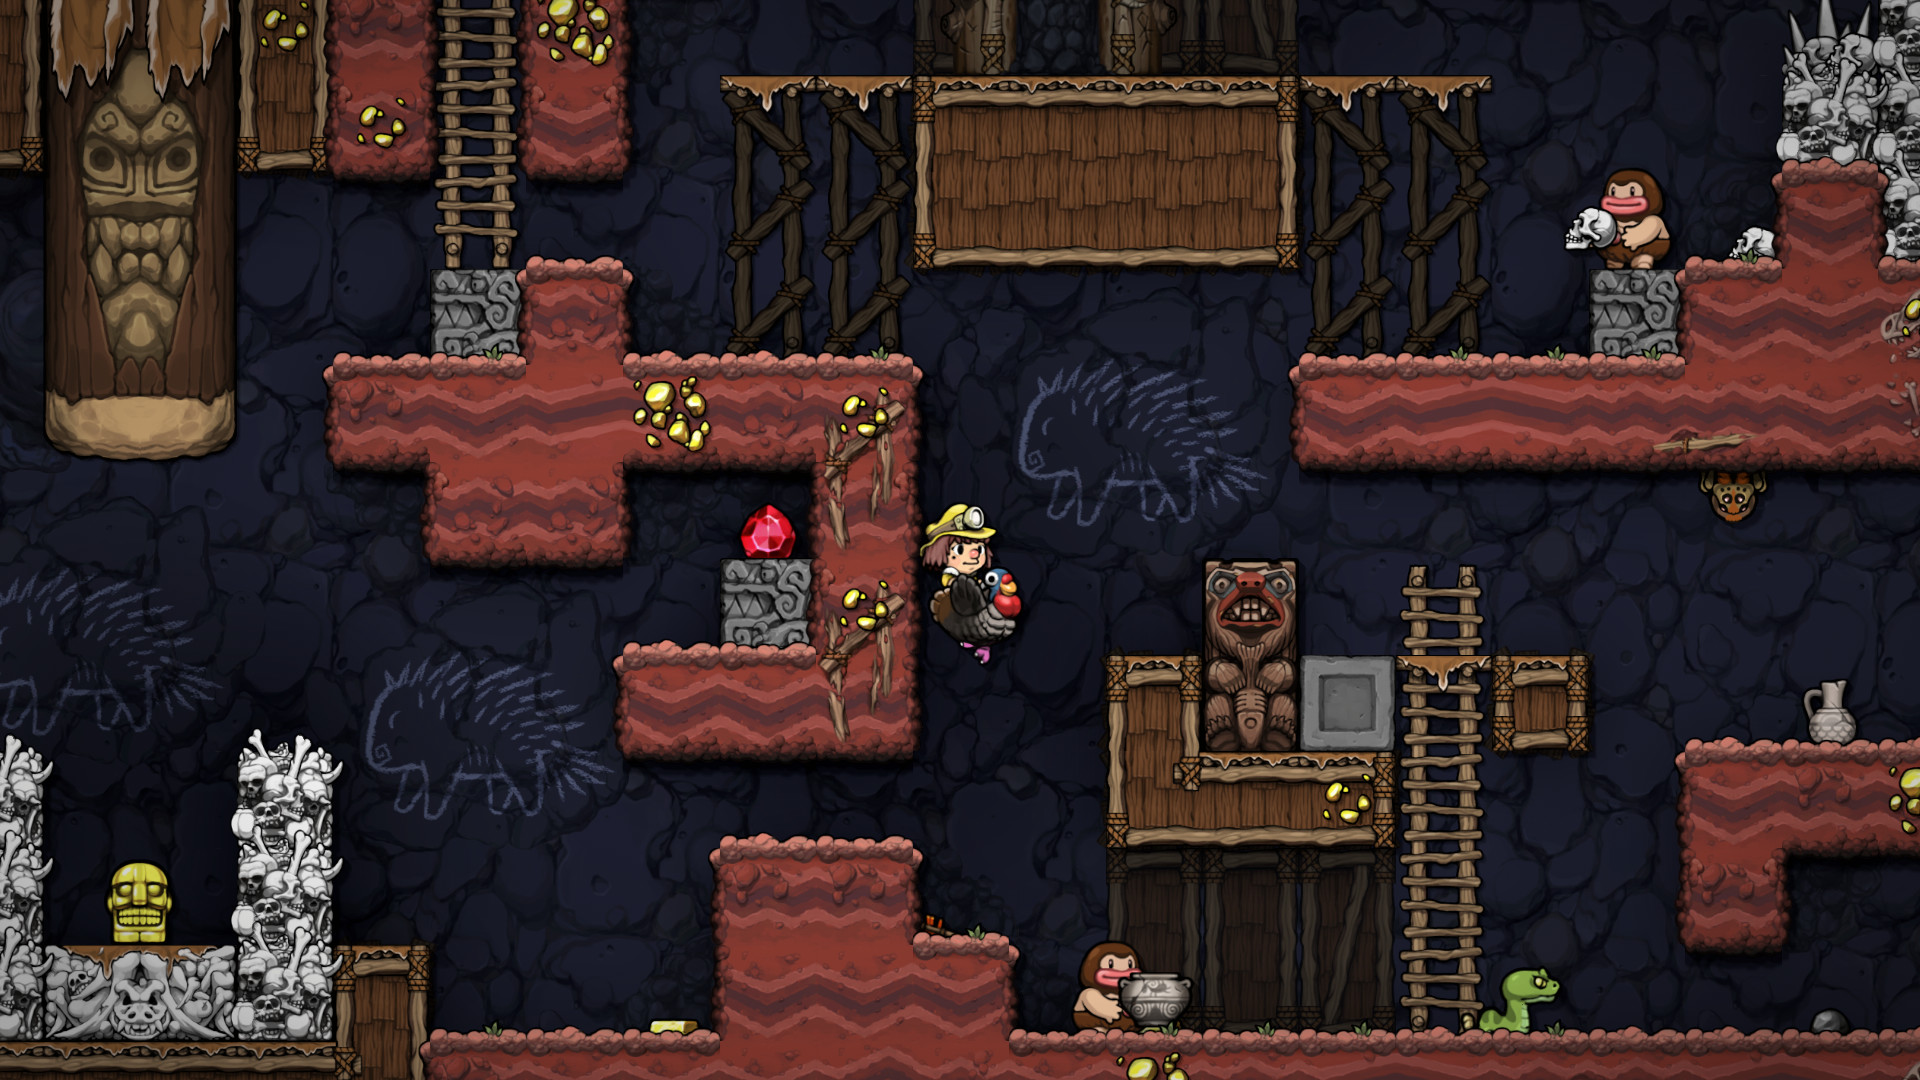 Delayed roguelike 'Spelunky 2' comes to PS4 on September 15th